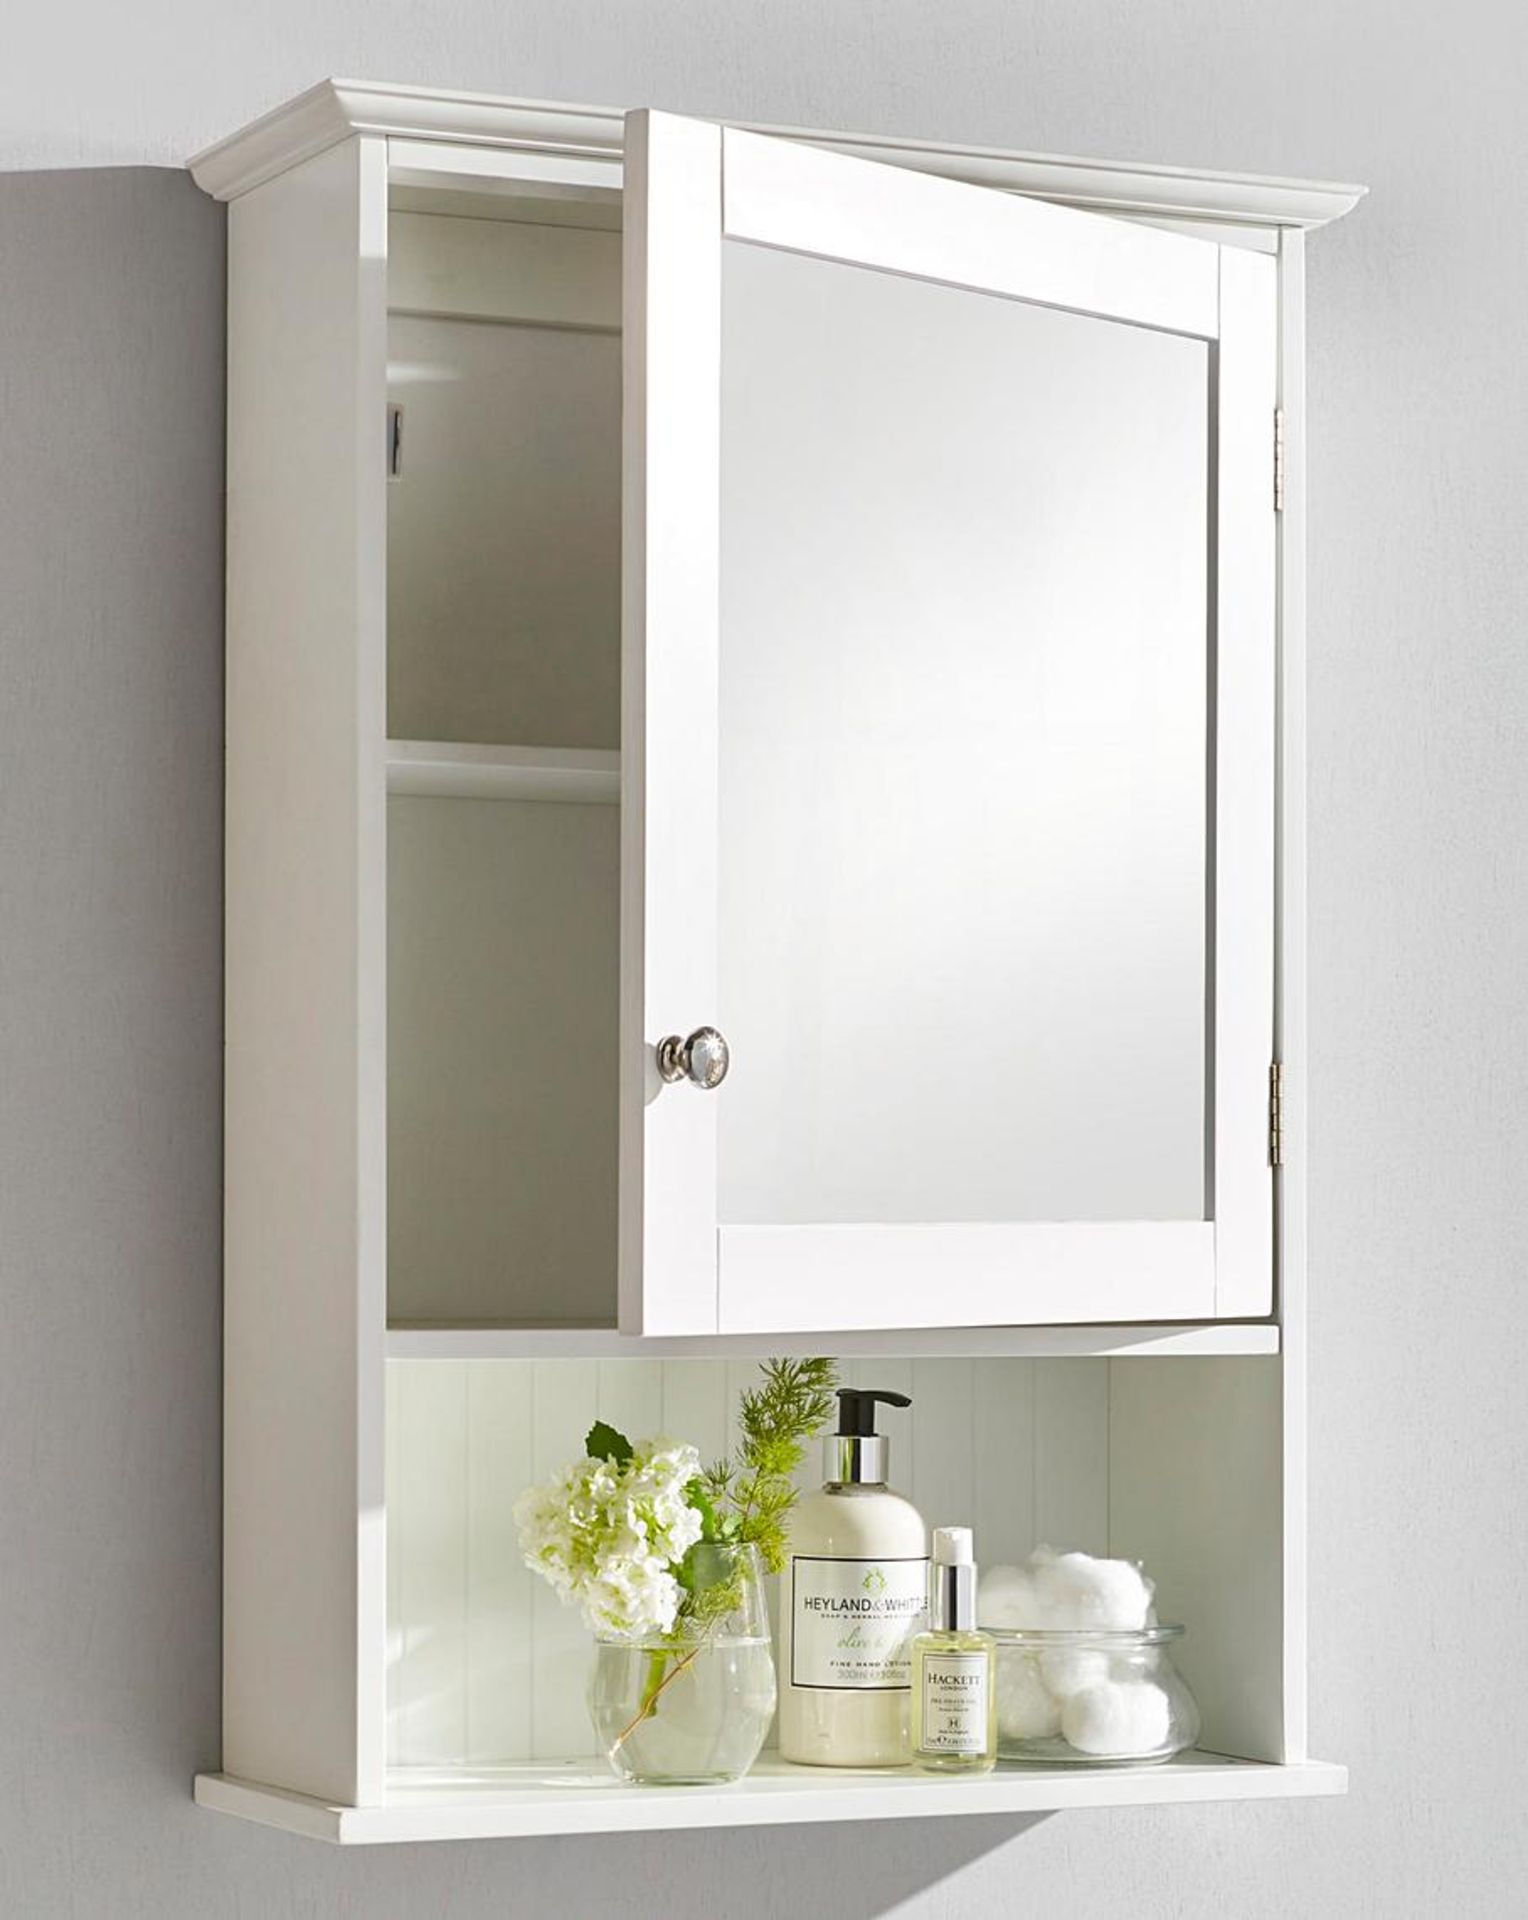 New England Mirror Cabinet. - SR4. Clean, pretty and boasting a gorgeous country style, this - Image 2 of 2